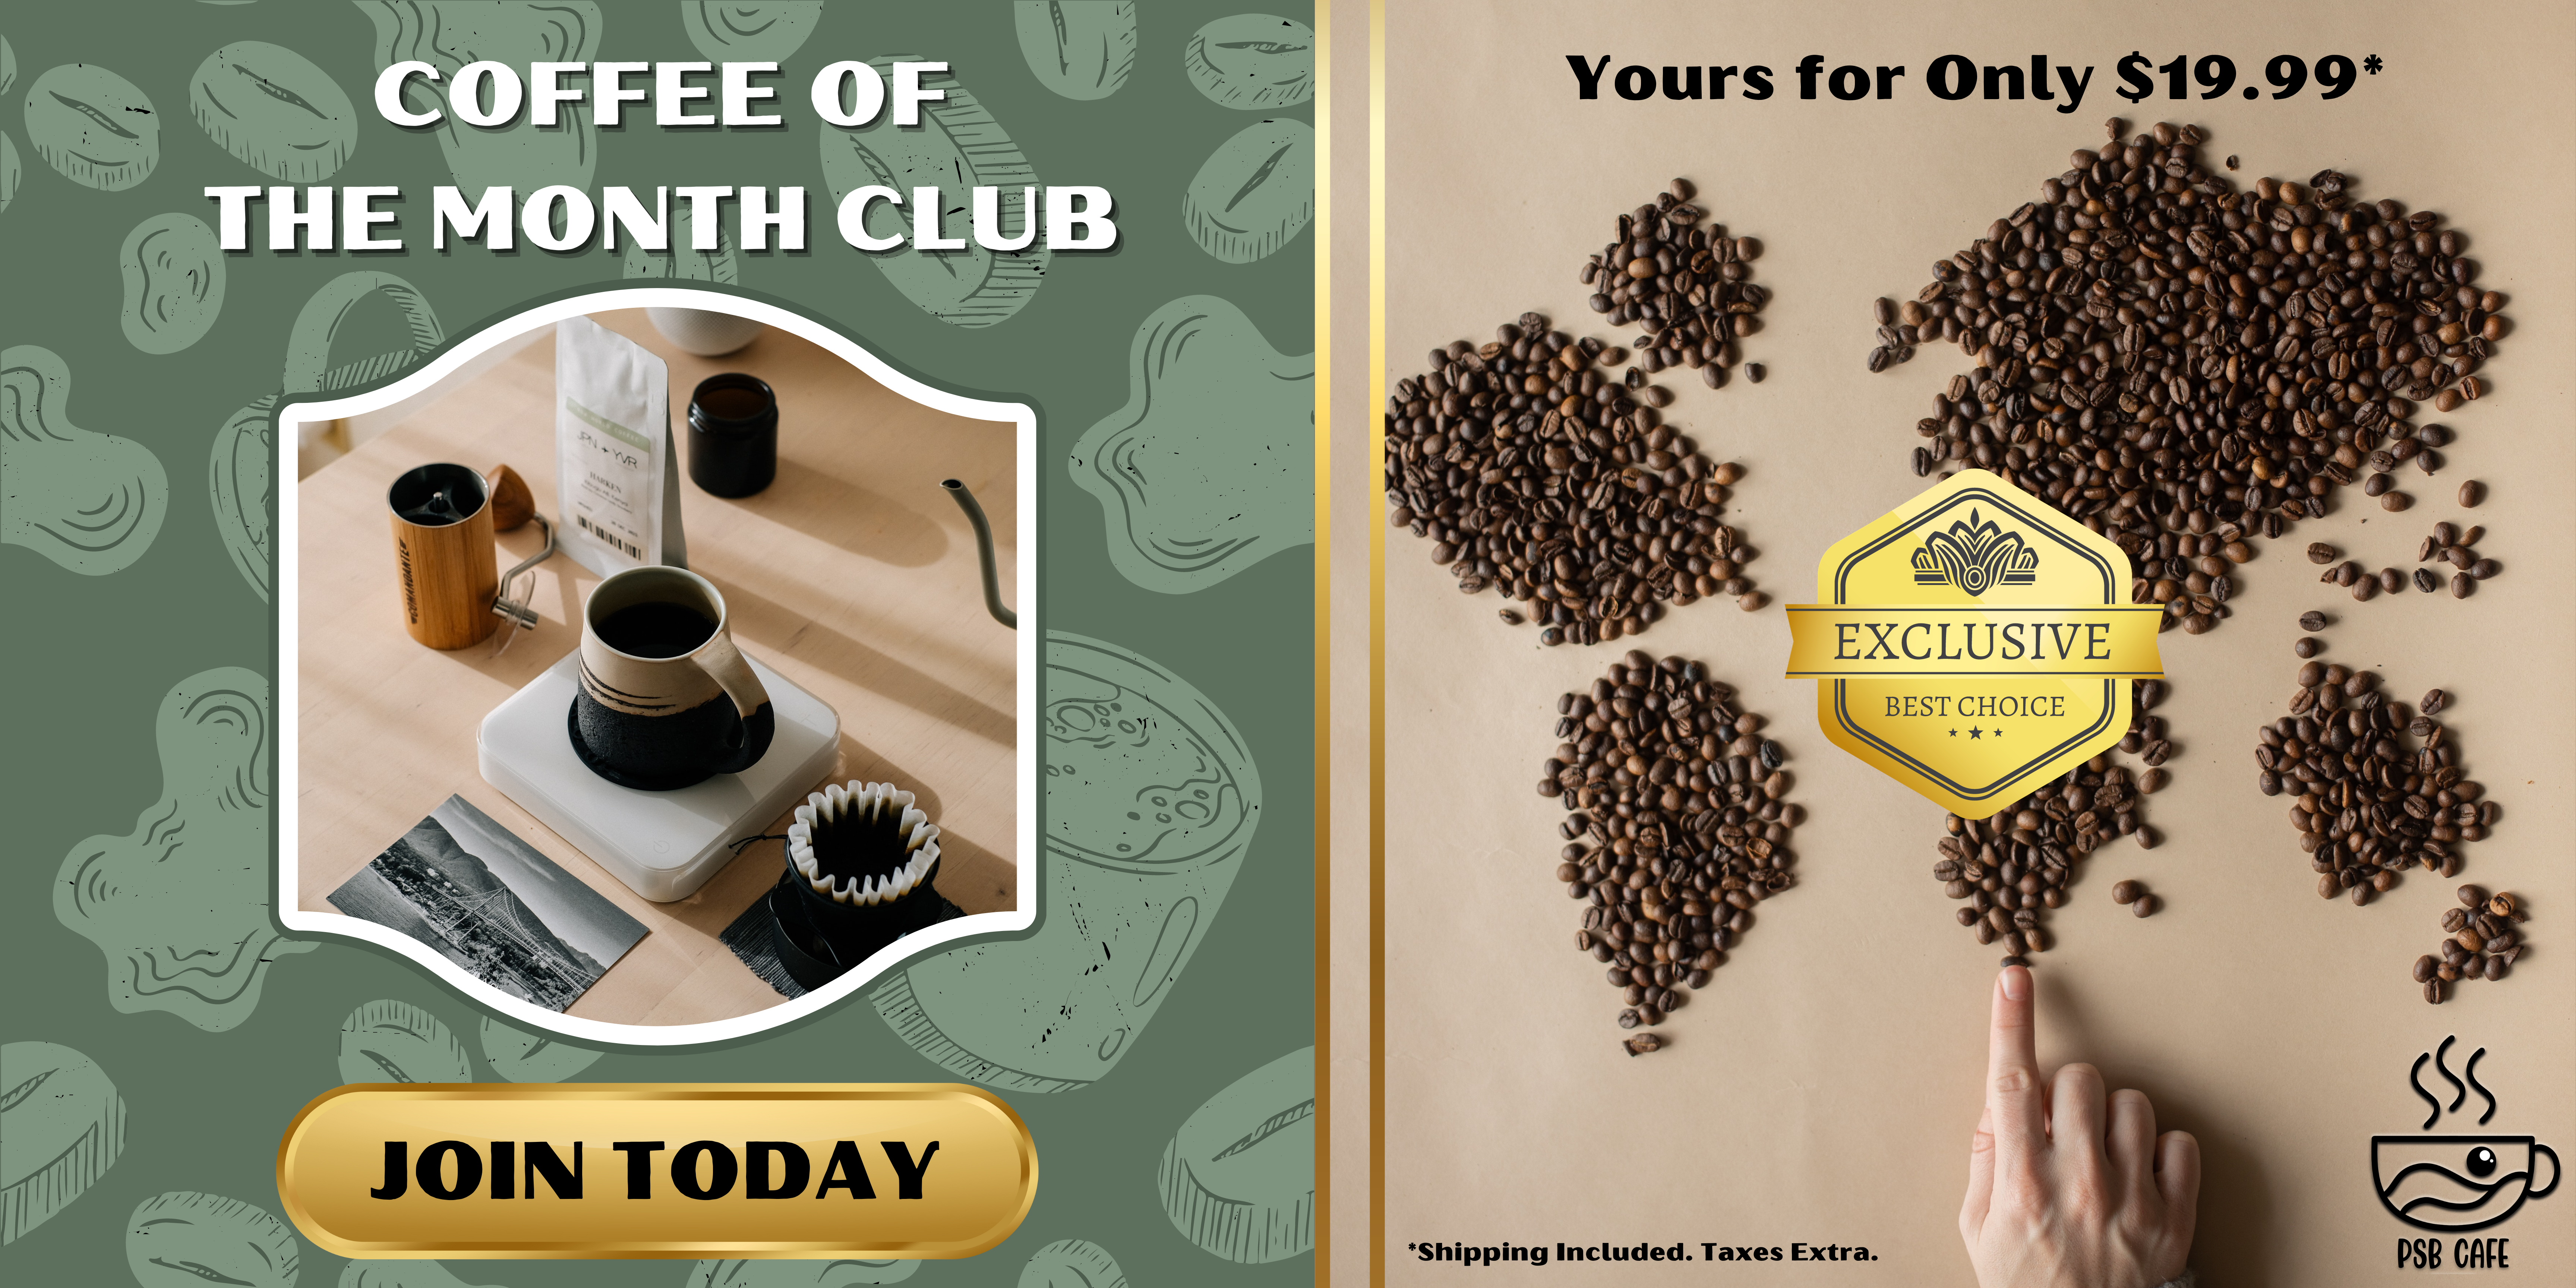 A promotional banner for a monthly coffee subscription service sold by an international coffee connoisseurs cafe in Mississauga.